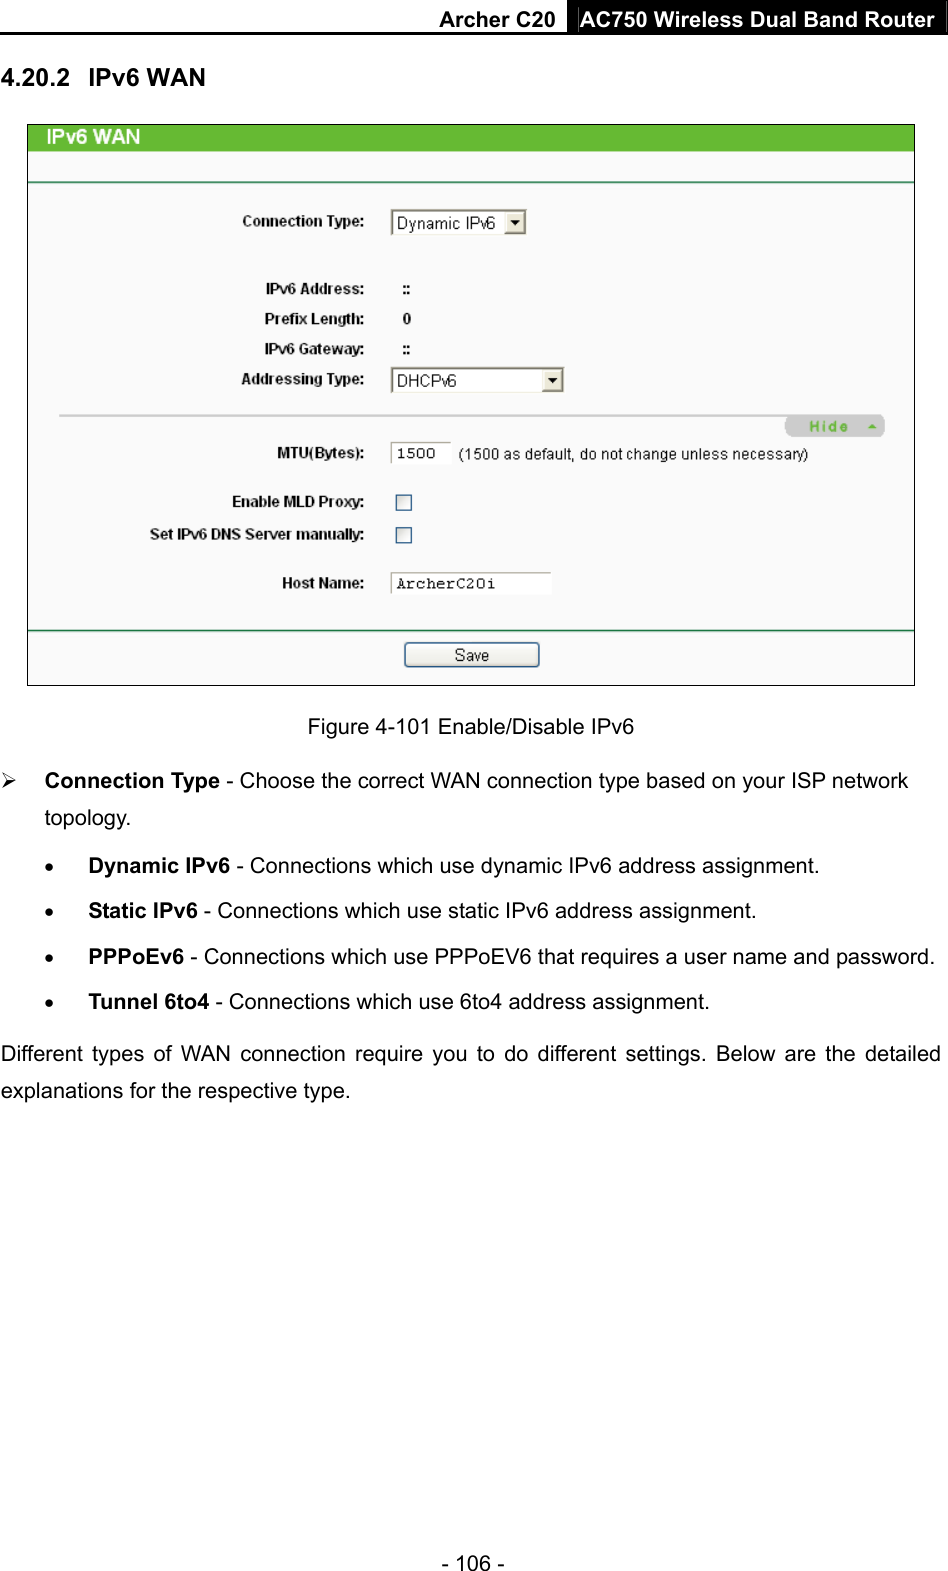 Archer C20 AC750 Wireless Dual Band Router - 106 - 4.20.2  IPv6 WAN  Figure 4-101 Enable/Disable IPv6  Connection Type - Choose the correct WAN connection type based on your ISP network topology.  Dynamic IPv6 - Connections which use dynamic IPv6 address assignment.    Static IPv6 - Connections which use static IPv6 address assignment.    PPPoEv6 - Connections which use PPPoEV6 that requires a user name and password.    Tunnel 6to4 - Connections which use 6to4 address assignment. Different types of WAN connection require you to do different settings. Below are the detailed explanations for the respective type. 